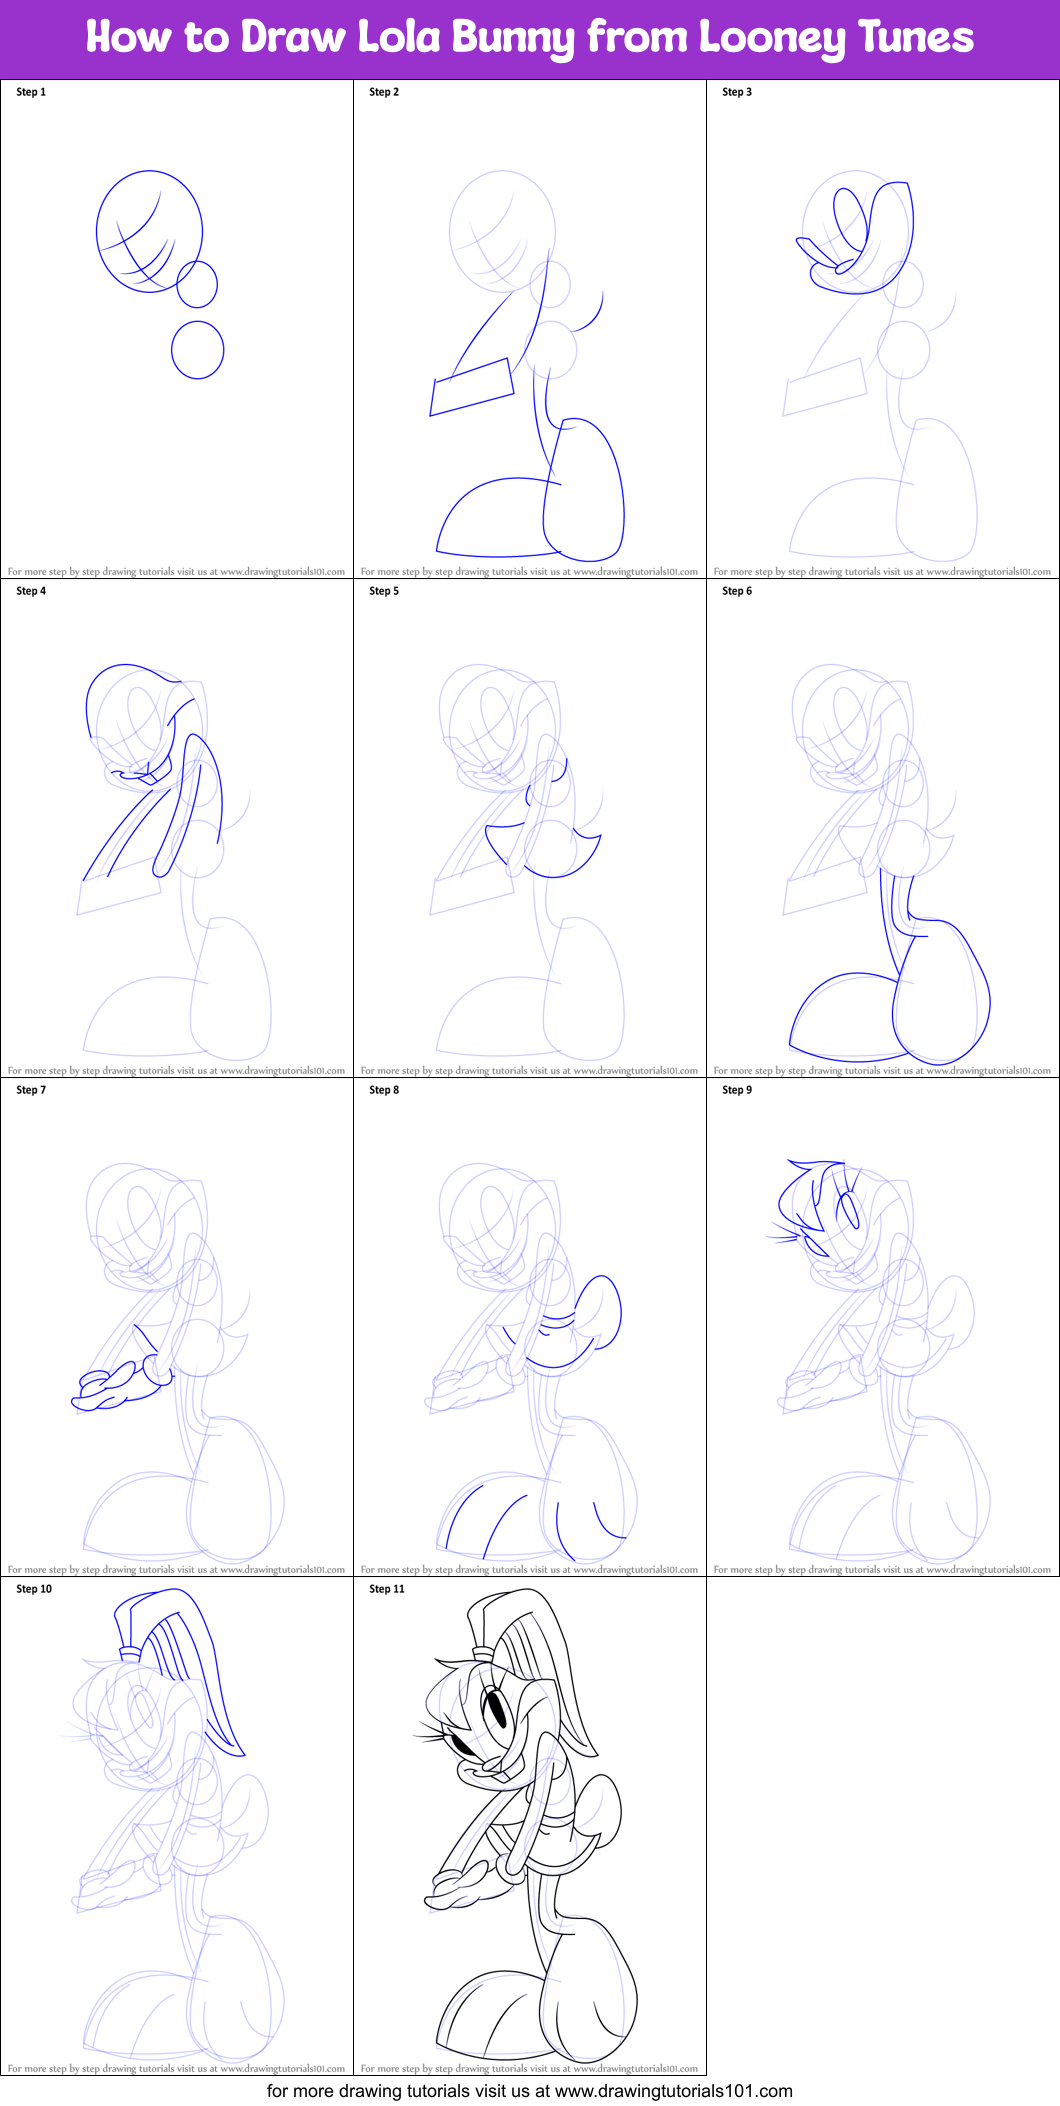 How to Draw Lola Bunny from Looney Tunes printable step by step drawing